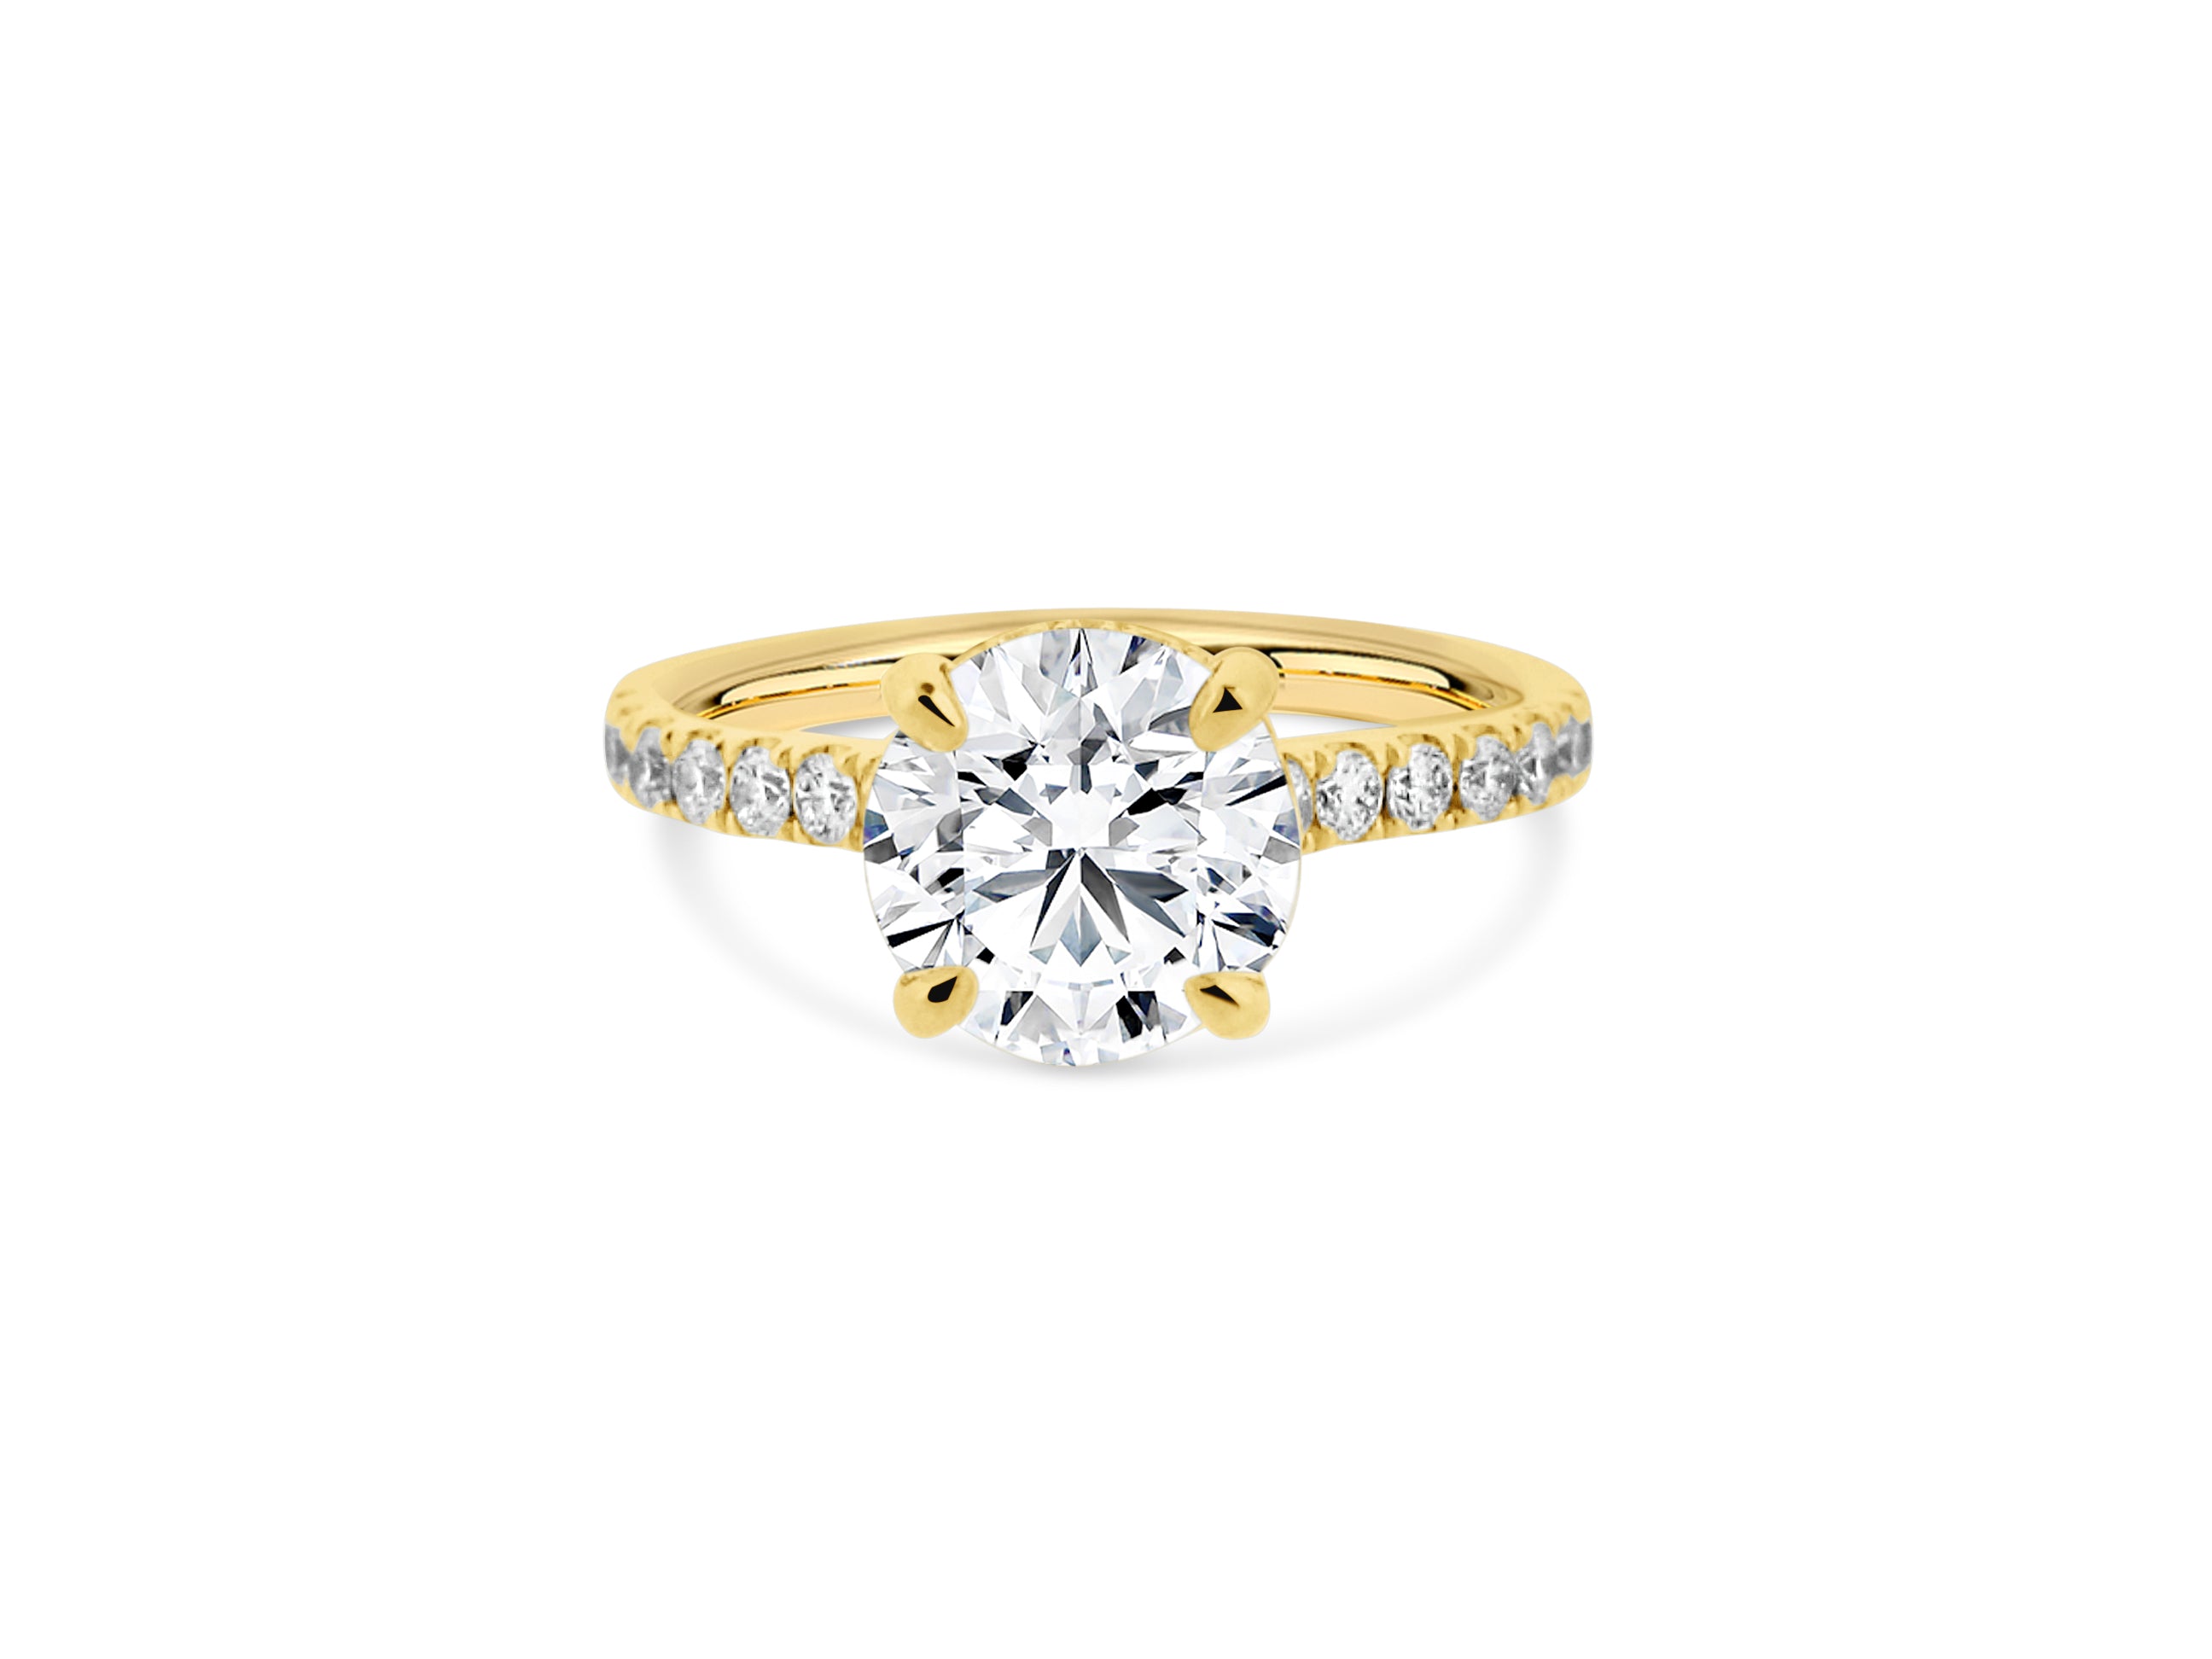 PRIVE' 18K YELLOW GOLD 2.29CT SI1 CLARITY AND F COLOR ROUND SWAROVSKI LAB GROWN DIAMOND SURROUNDED BY .47CT VS/SI-G NATURAL DIAMONDS - CERTIFIED XXX CUT GRADE